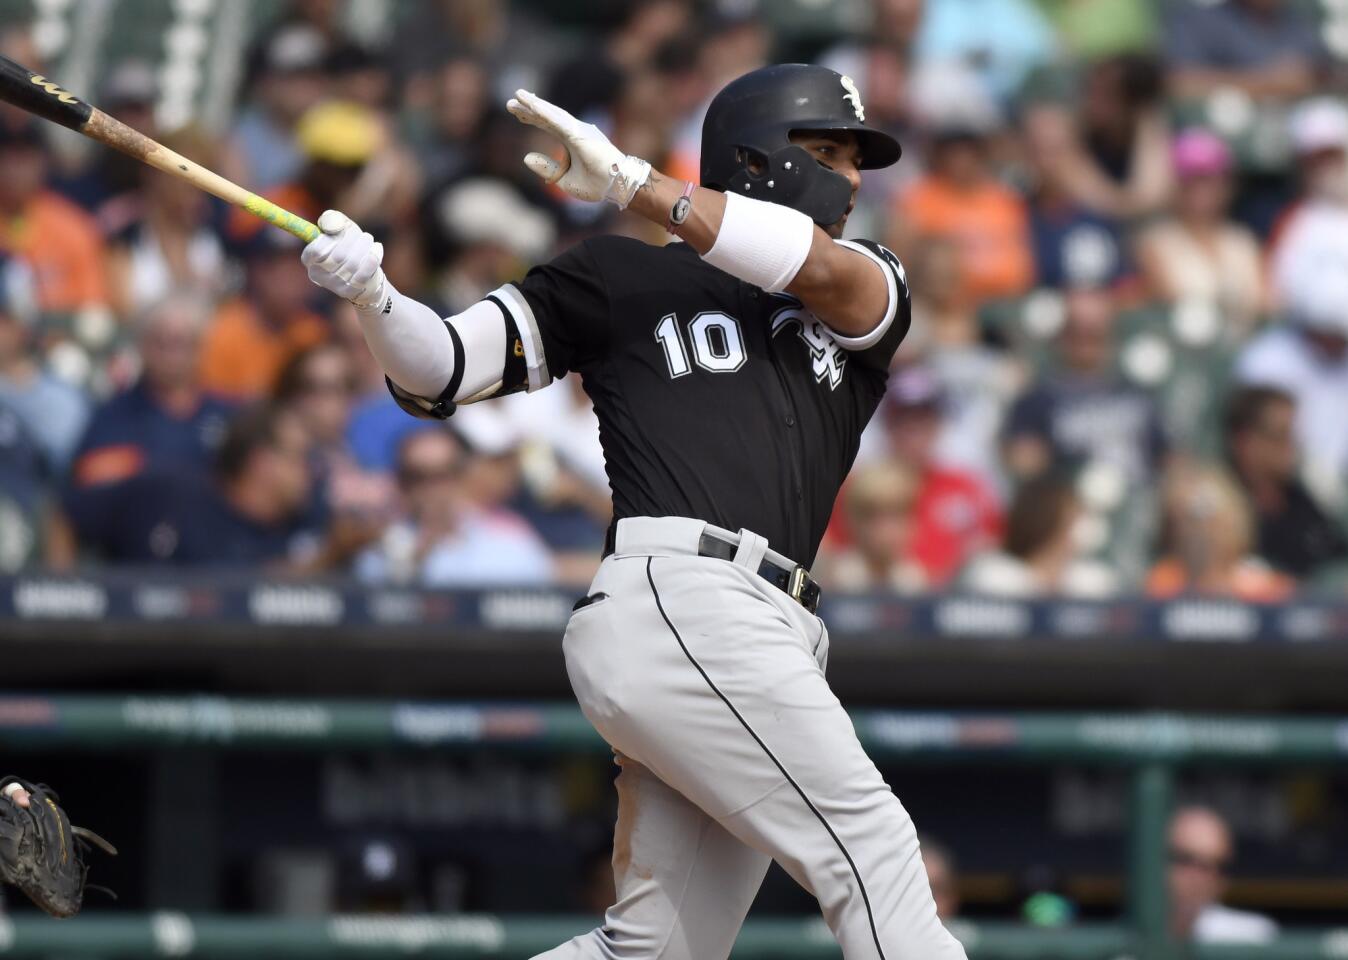 Yoan Moncada hits a single against the Tigers on Thursday, Sept. 14, 2017, in Detroit.